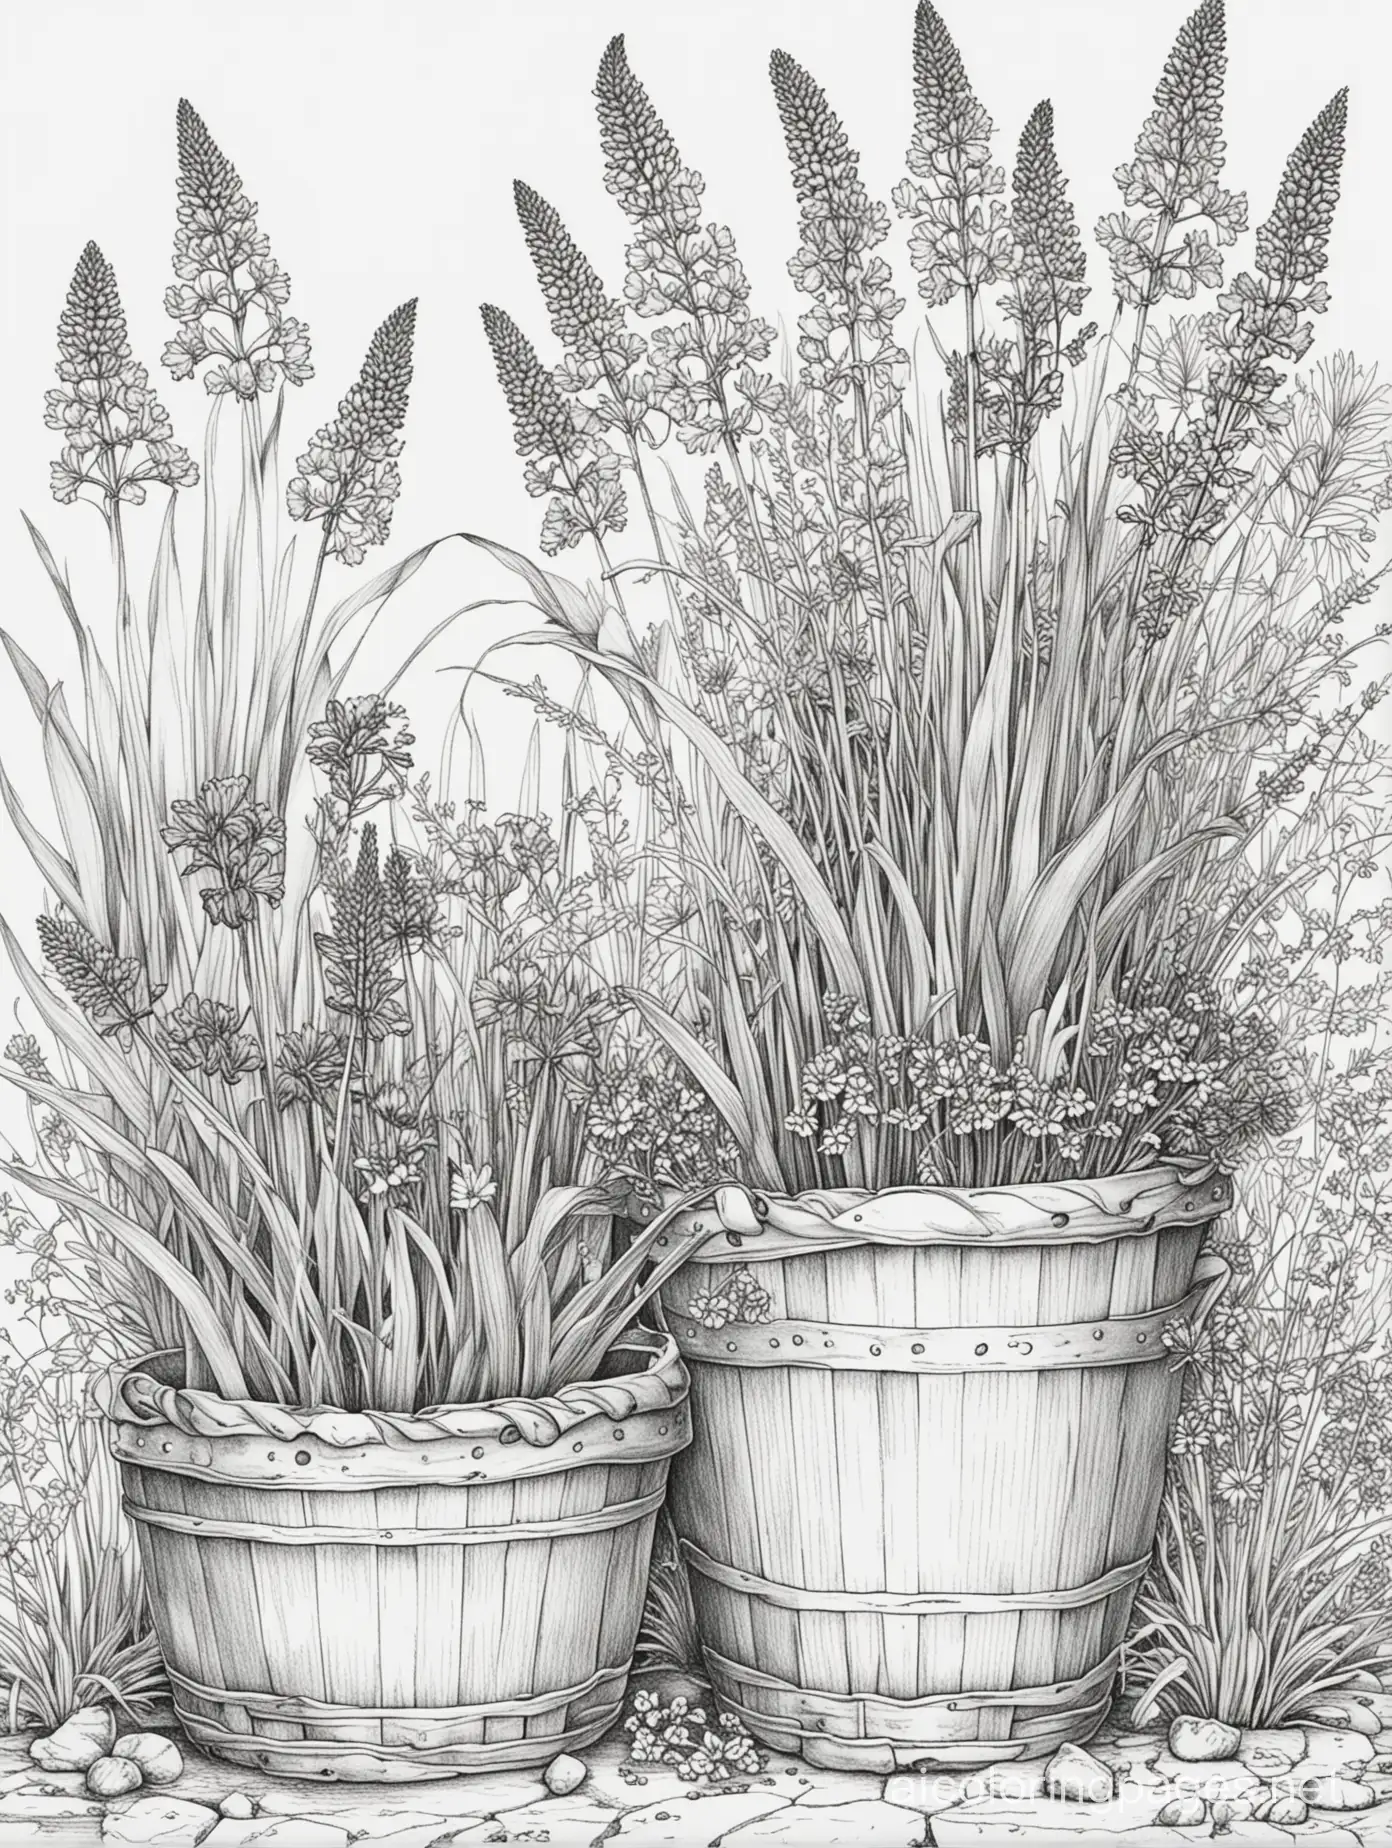 Create a picture for adult colouring in black and white only.  The theme of the picture: British garden. gardening. Style: sketching, ink, line drawings. the picture shows pots of flowers and a basket of muscari. The detail of the drawing is medium.  Ratio 3:4, Coloring Page, black and white, line art, white background, Simplicity, Ample White Space. The background of the coloring page is plain white to make it easy for young children to color within the lines. The outlines of all the subjects are easy to distinguish, making it simple for kids to color without too much difficulty